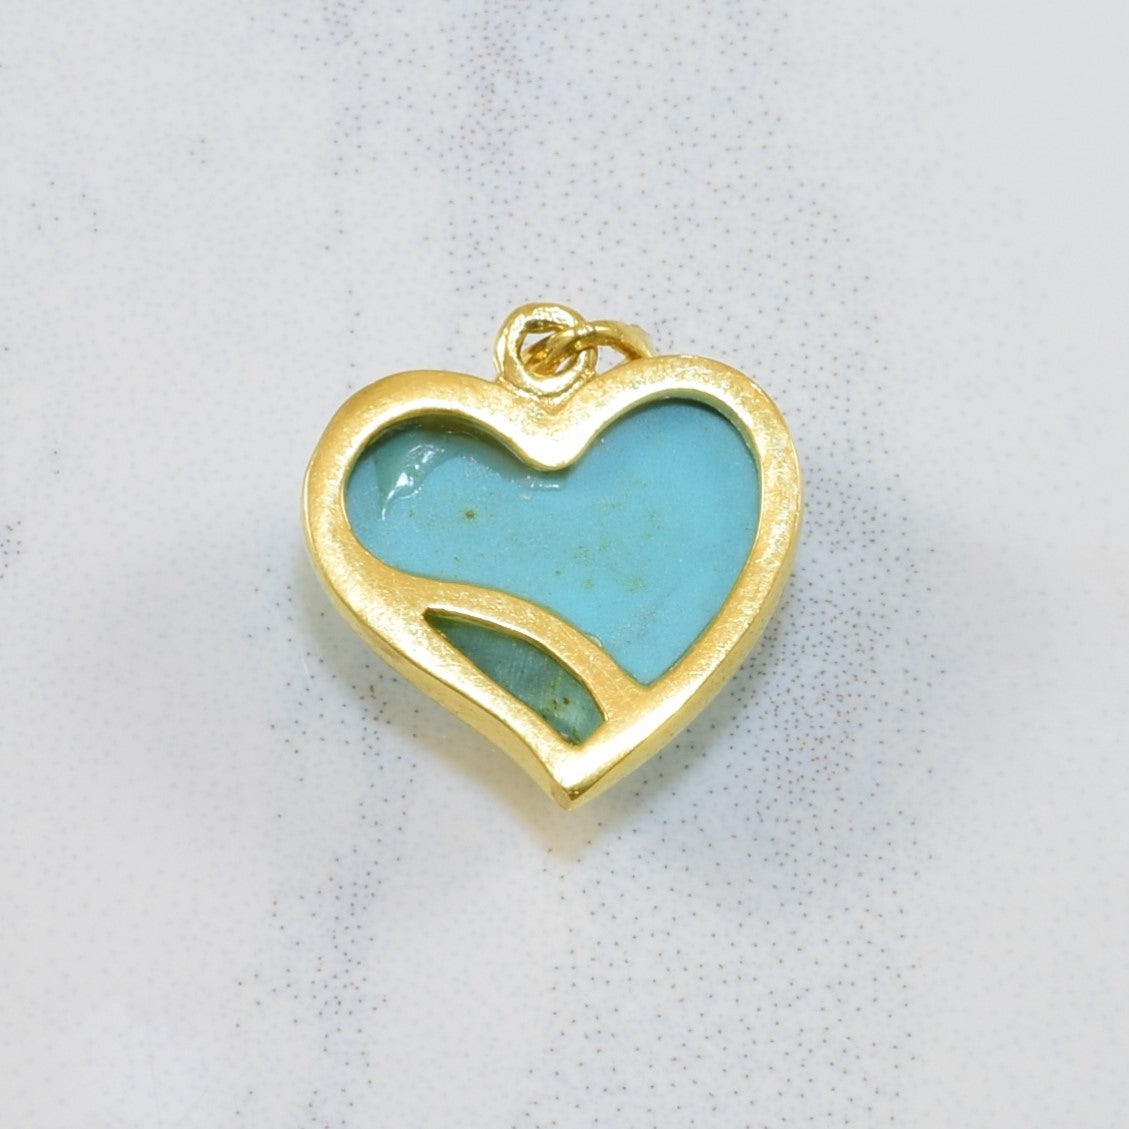 Heart Cut Synthetic Turquoise Pendant | 1.75ct |